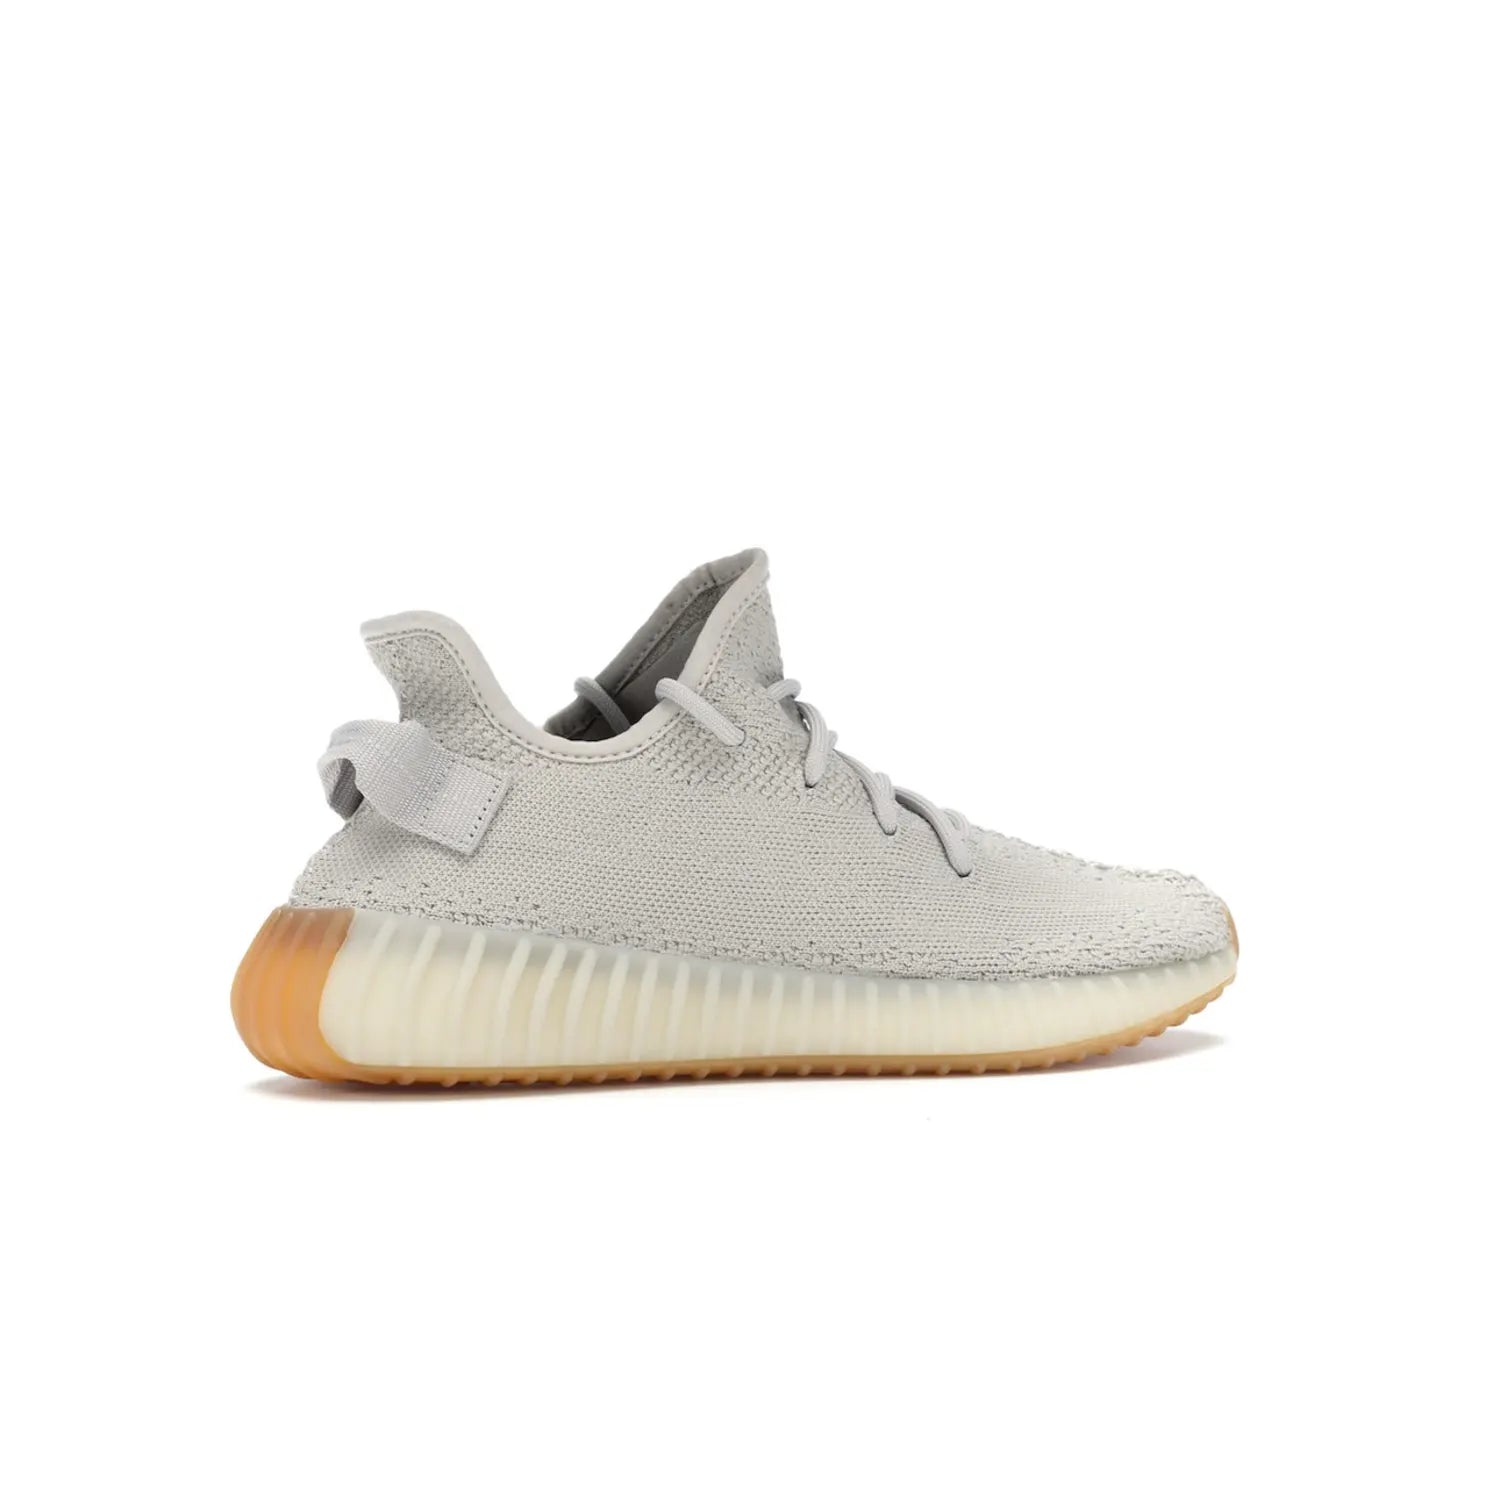 adidas Yeezy Boost 350 V2 Sesame - Image 35 - Only at www.BallersClubKickz.com - Introducing the adidas Yeezy Boost 350 V2 Sesame. Featuring a sesame upper, midsole and gum sole for a sleek silhouette. Cop the stylish sneaker released in November 2018.